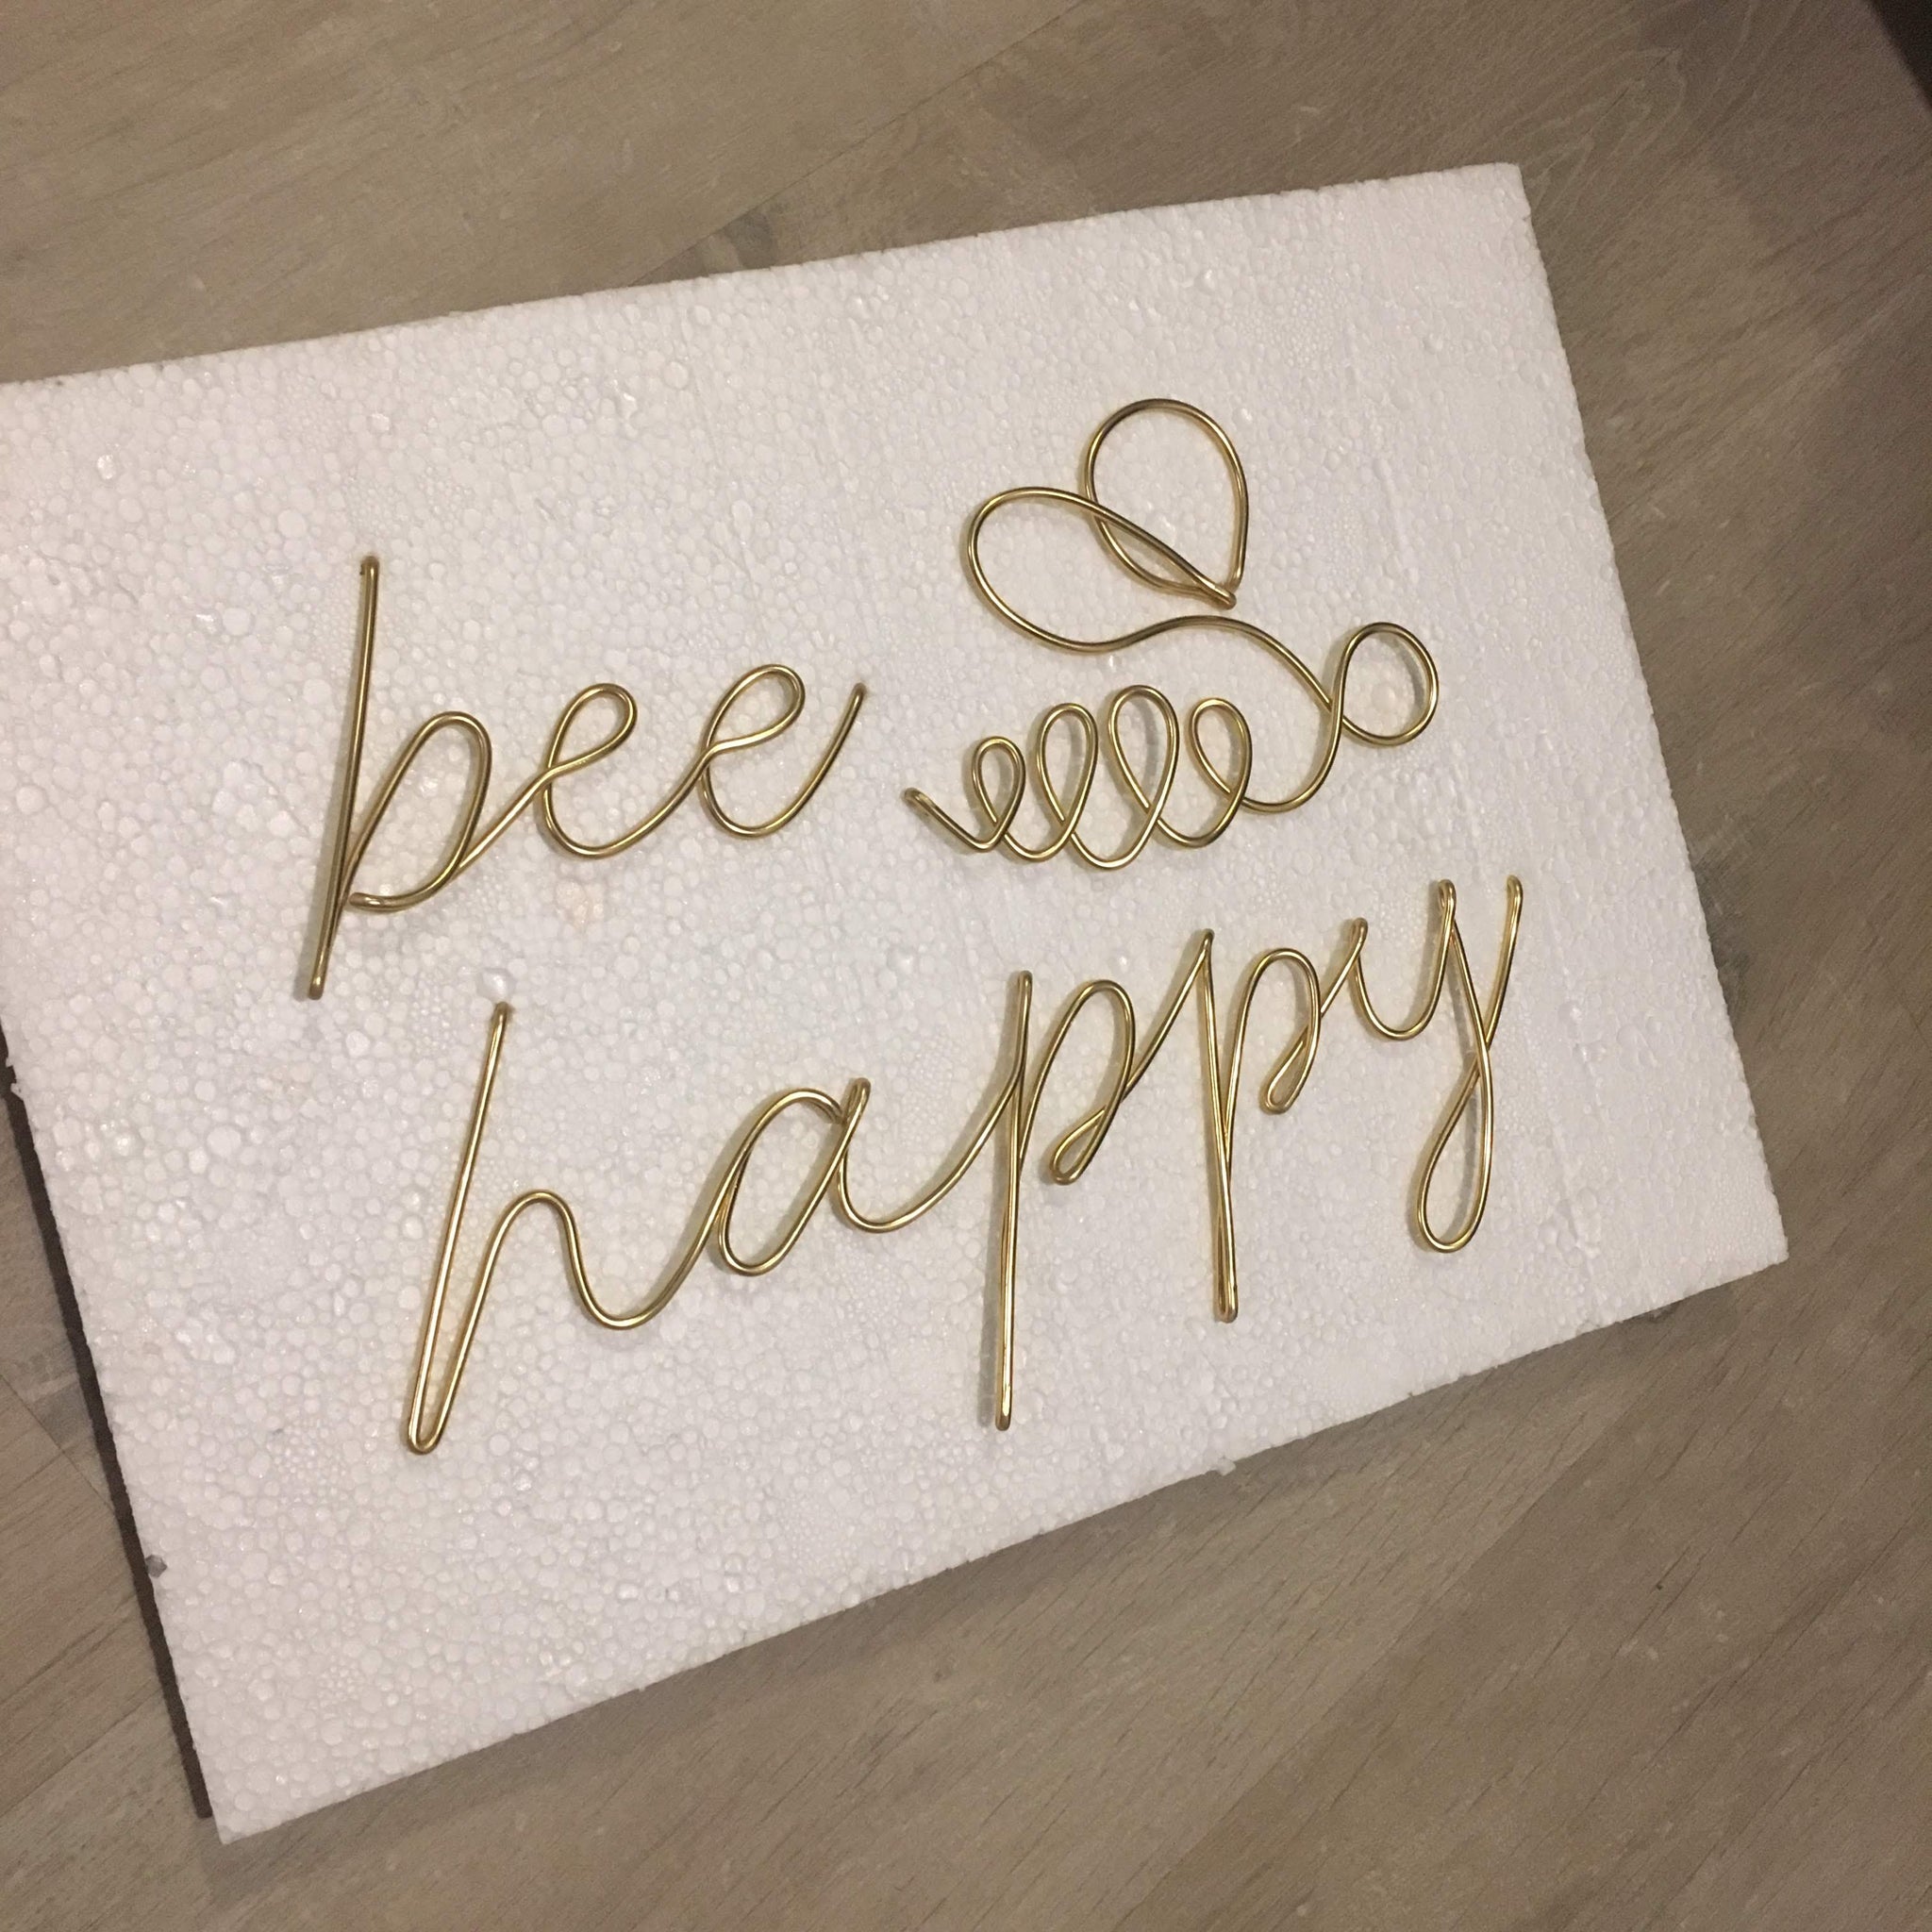 Bee happy (with bee) - Wire wall art